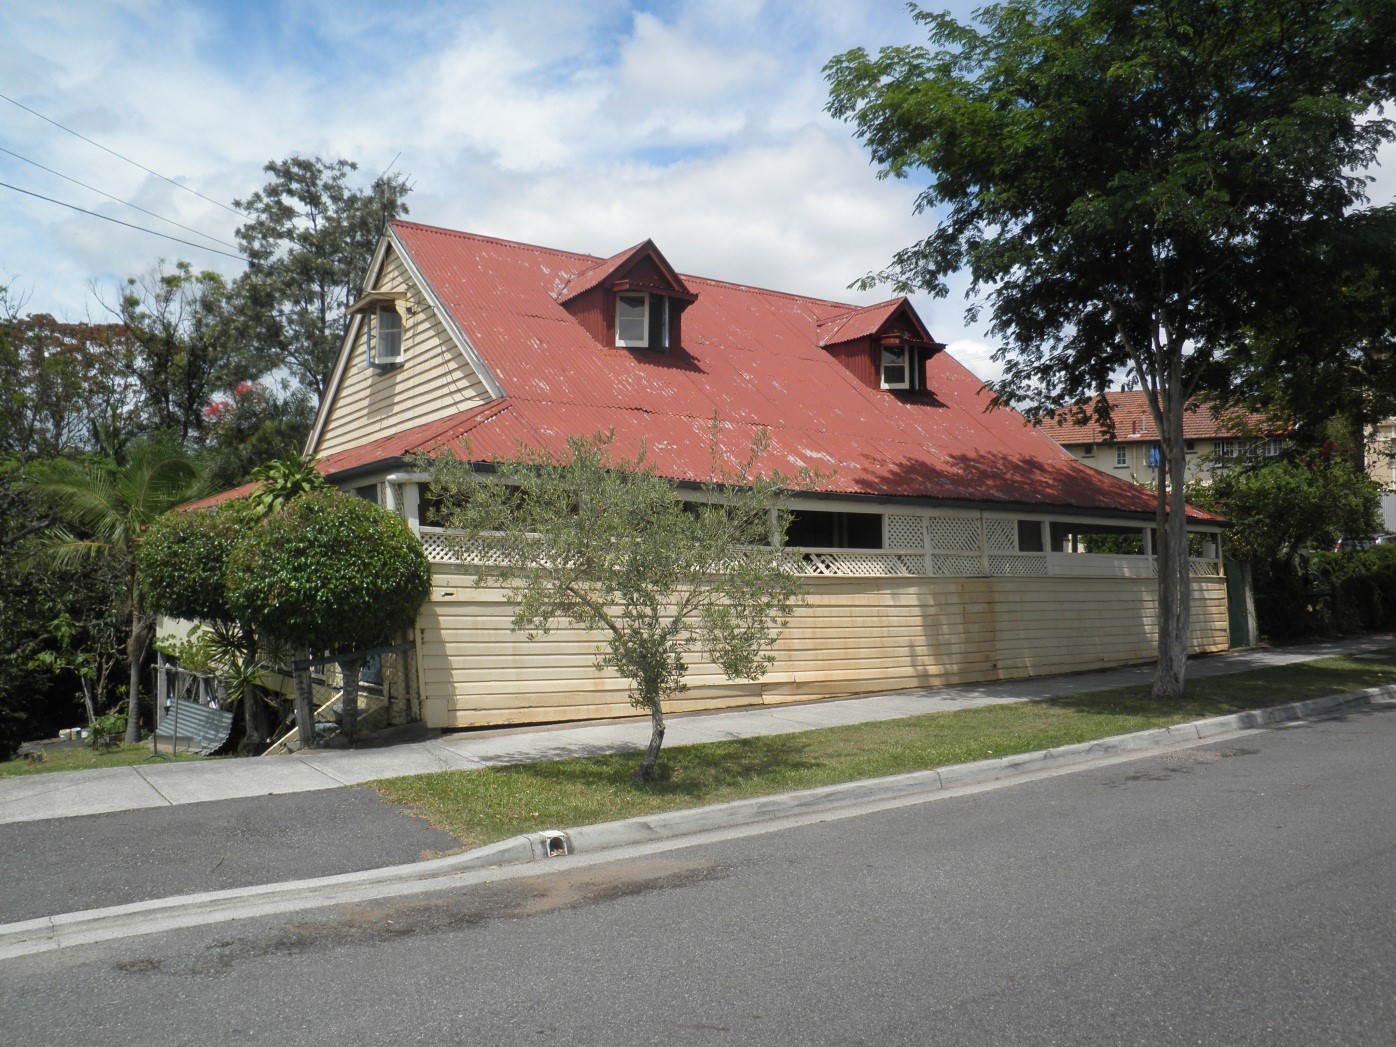 This is an image of the Heritage Place known as Residence Carina located on 1 Gertrude Street in Highgate Hill